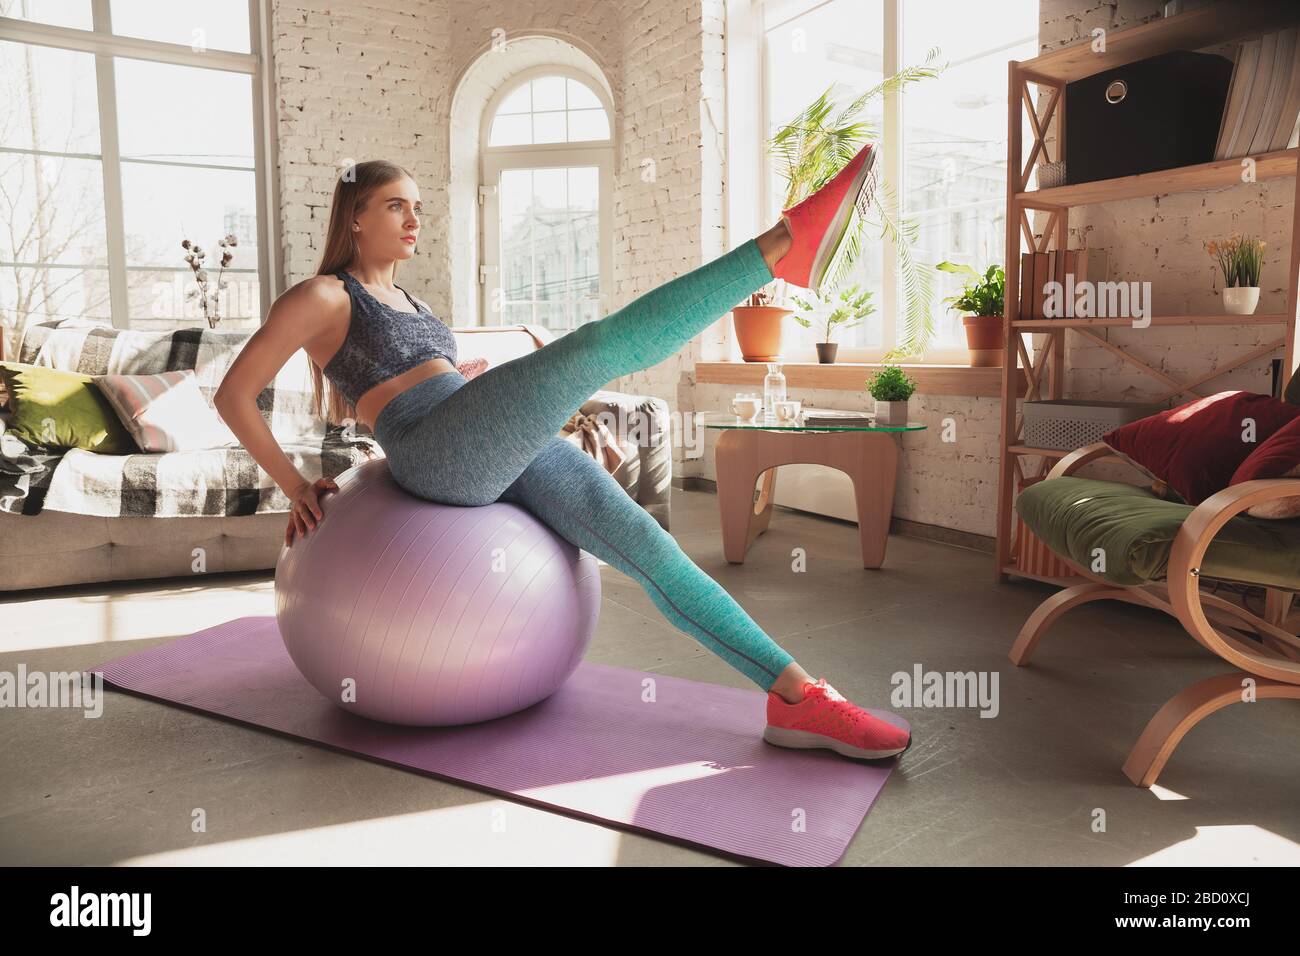 Young woman teaching at home online courses of fitness, aerobic, sporty lifestyle while quarantine. Getting active while isolated, wellness, movement concept. Exercises with fitball for lower body. Stock Photo